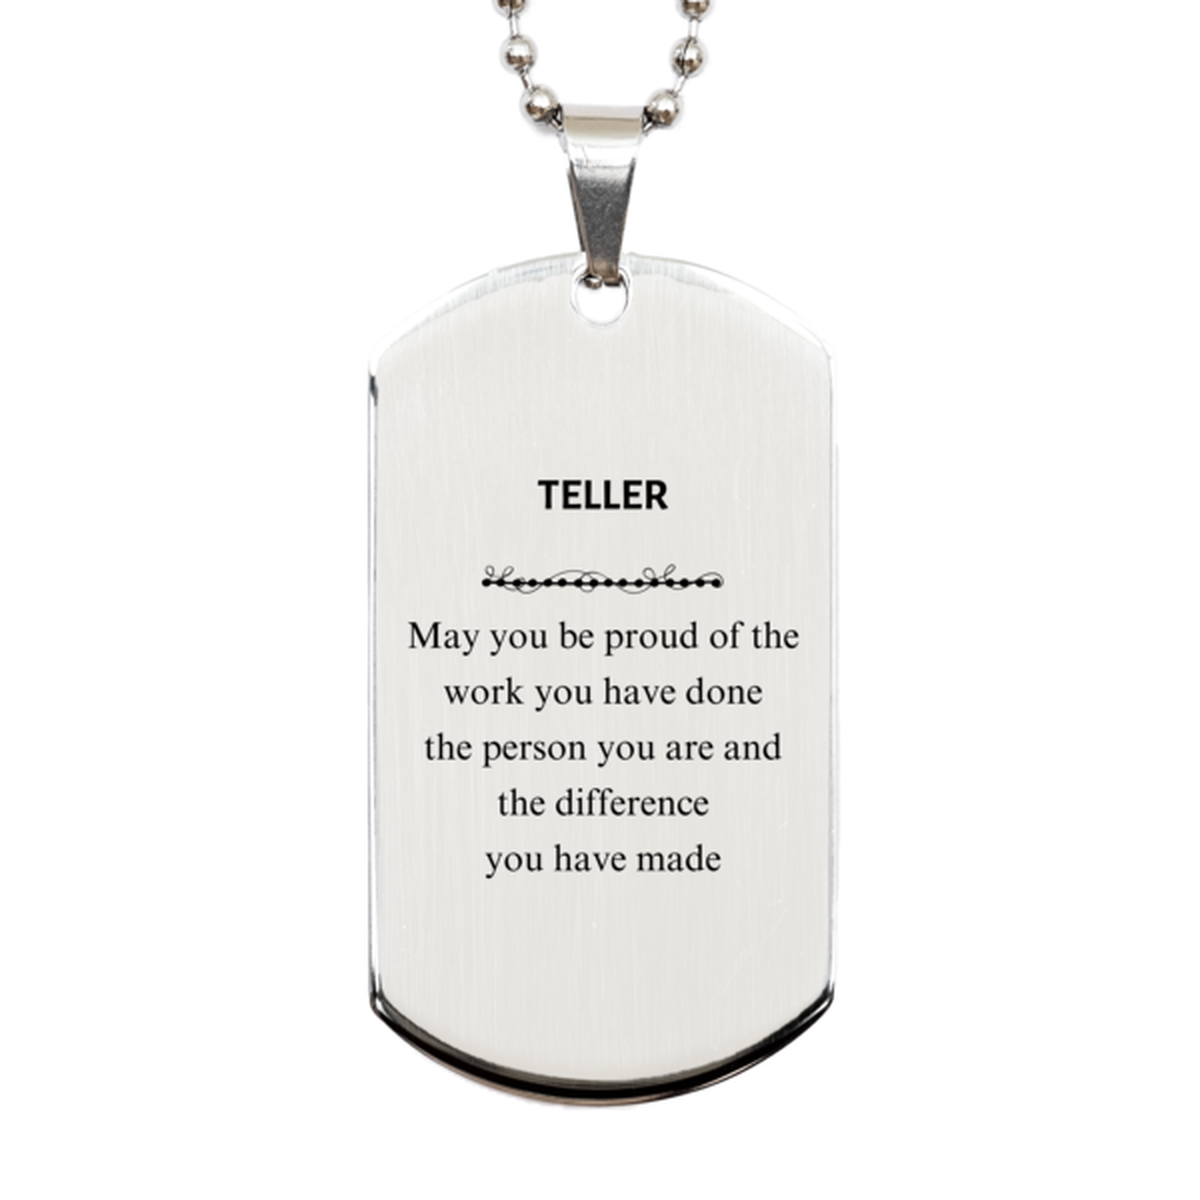 Teller May you be proud of the work you have done, Retirement Teller Silver Dog Tag for Colleague Appreciation Gifts Amazing for Teller